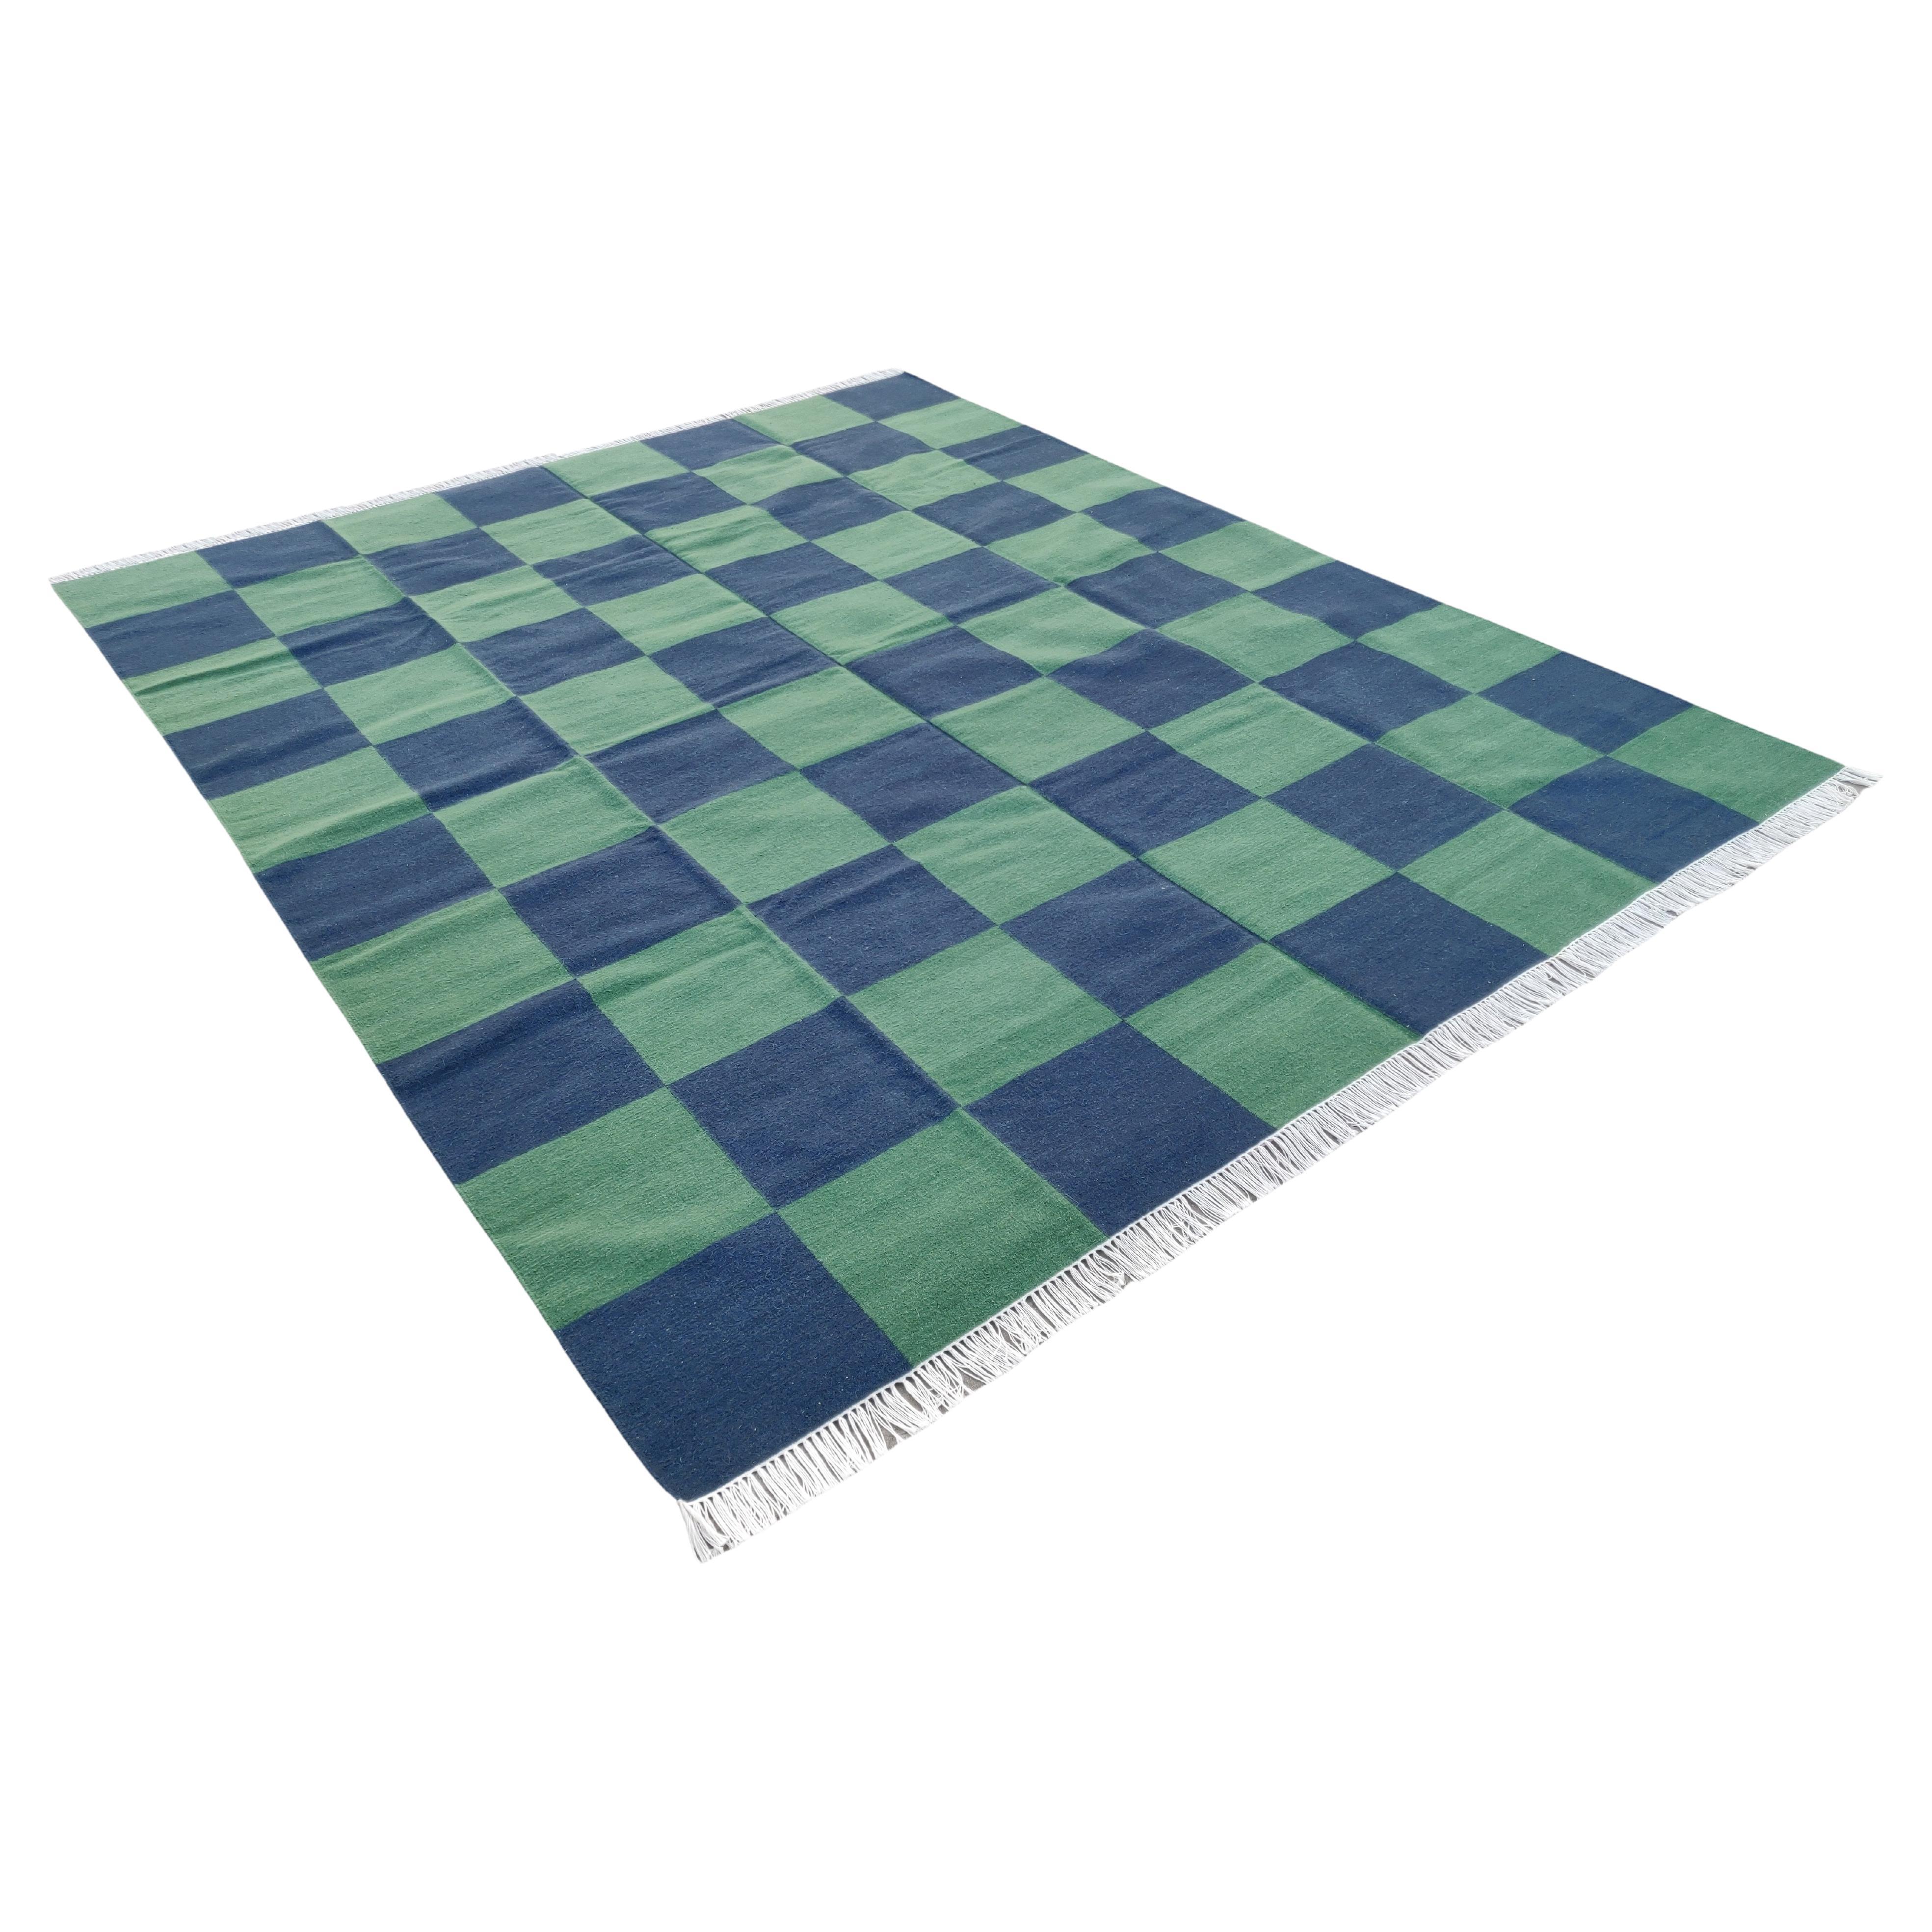 Handmade Woolen Area Flat Weave Rug, 6x9 Blue And Green Tile Checked Dhurrie Rug For Sale